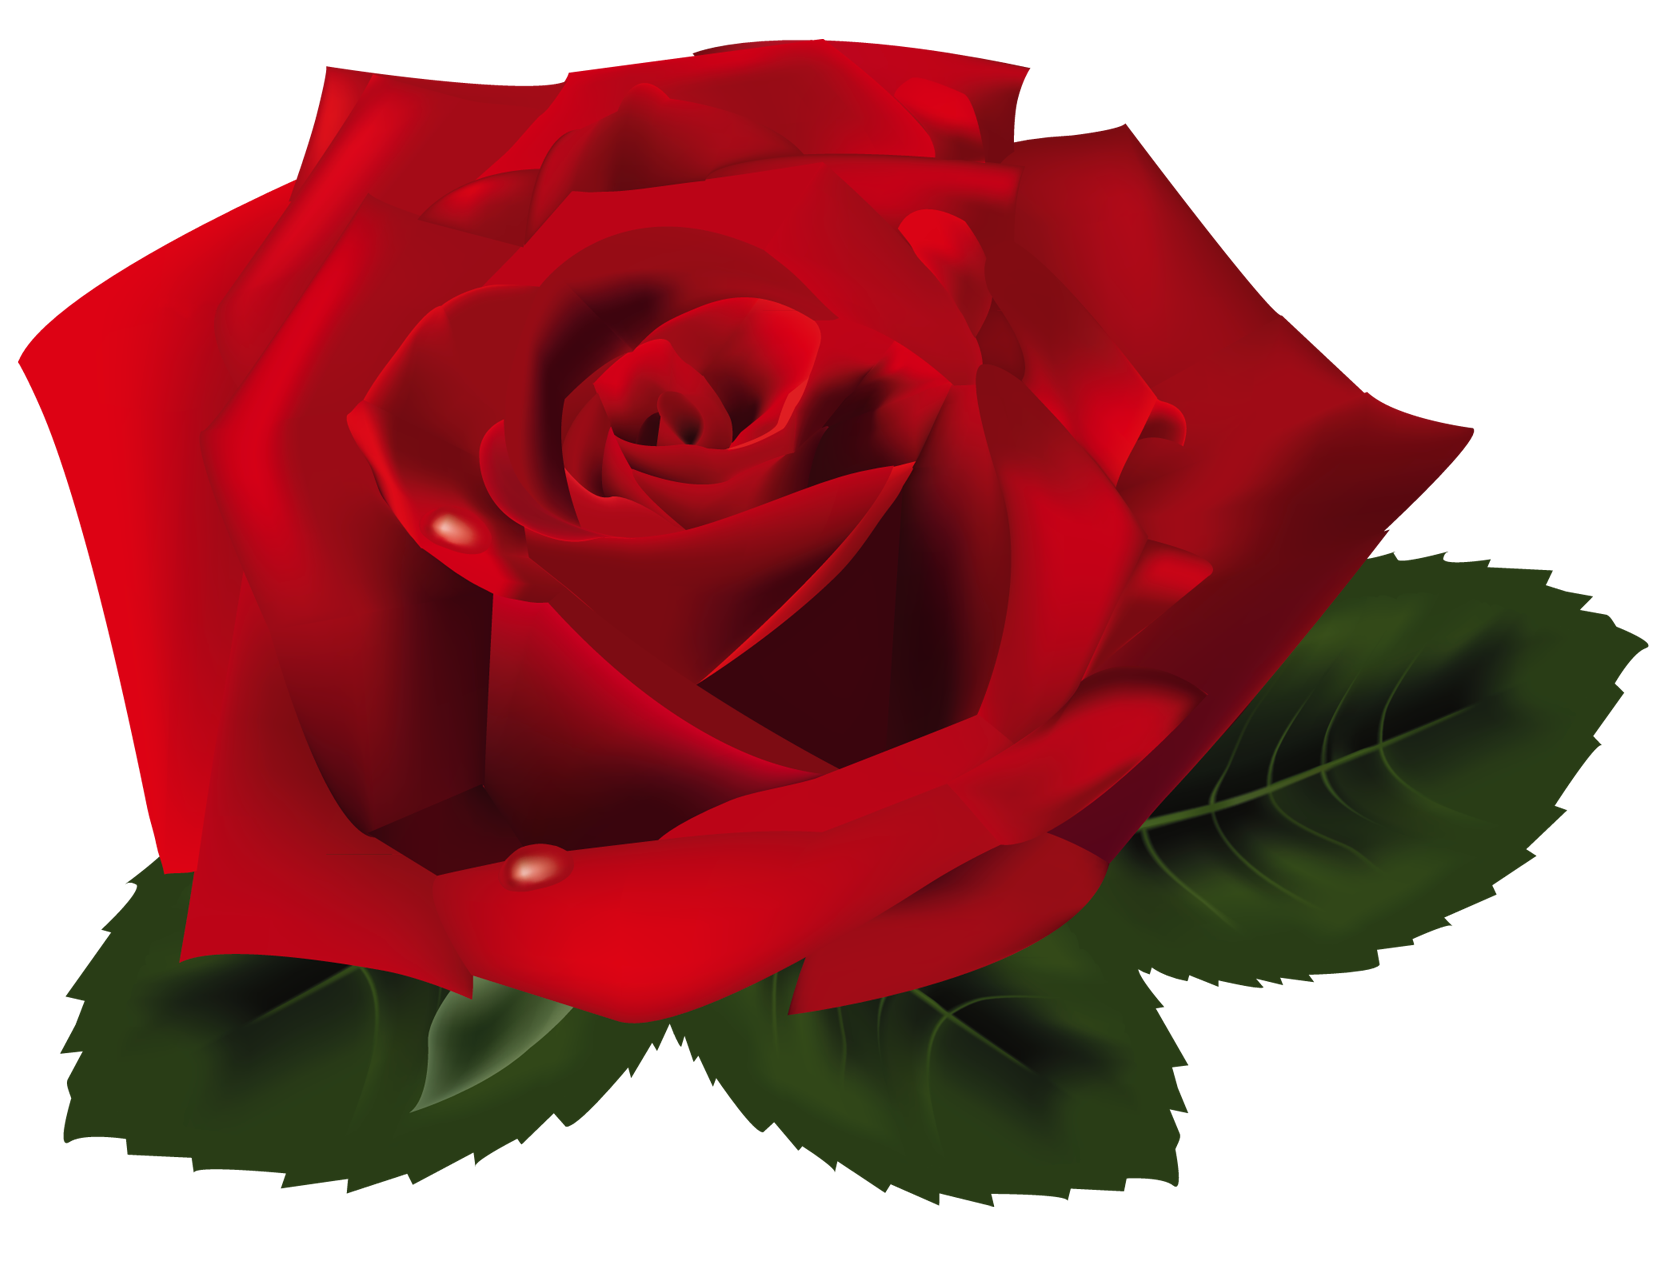 Free Rose Png, Download Free Clip Art, Free Clip Art on